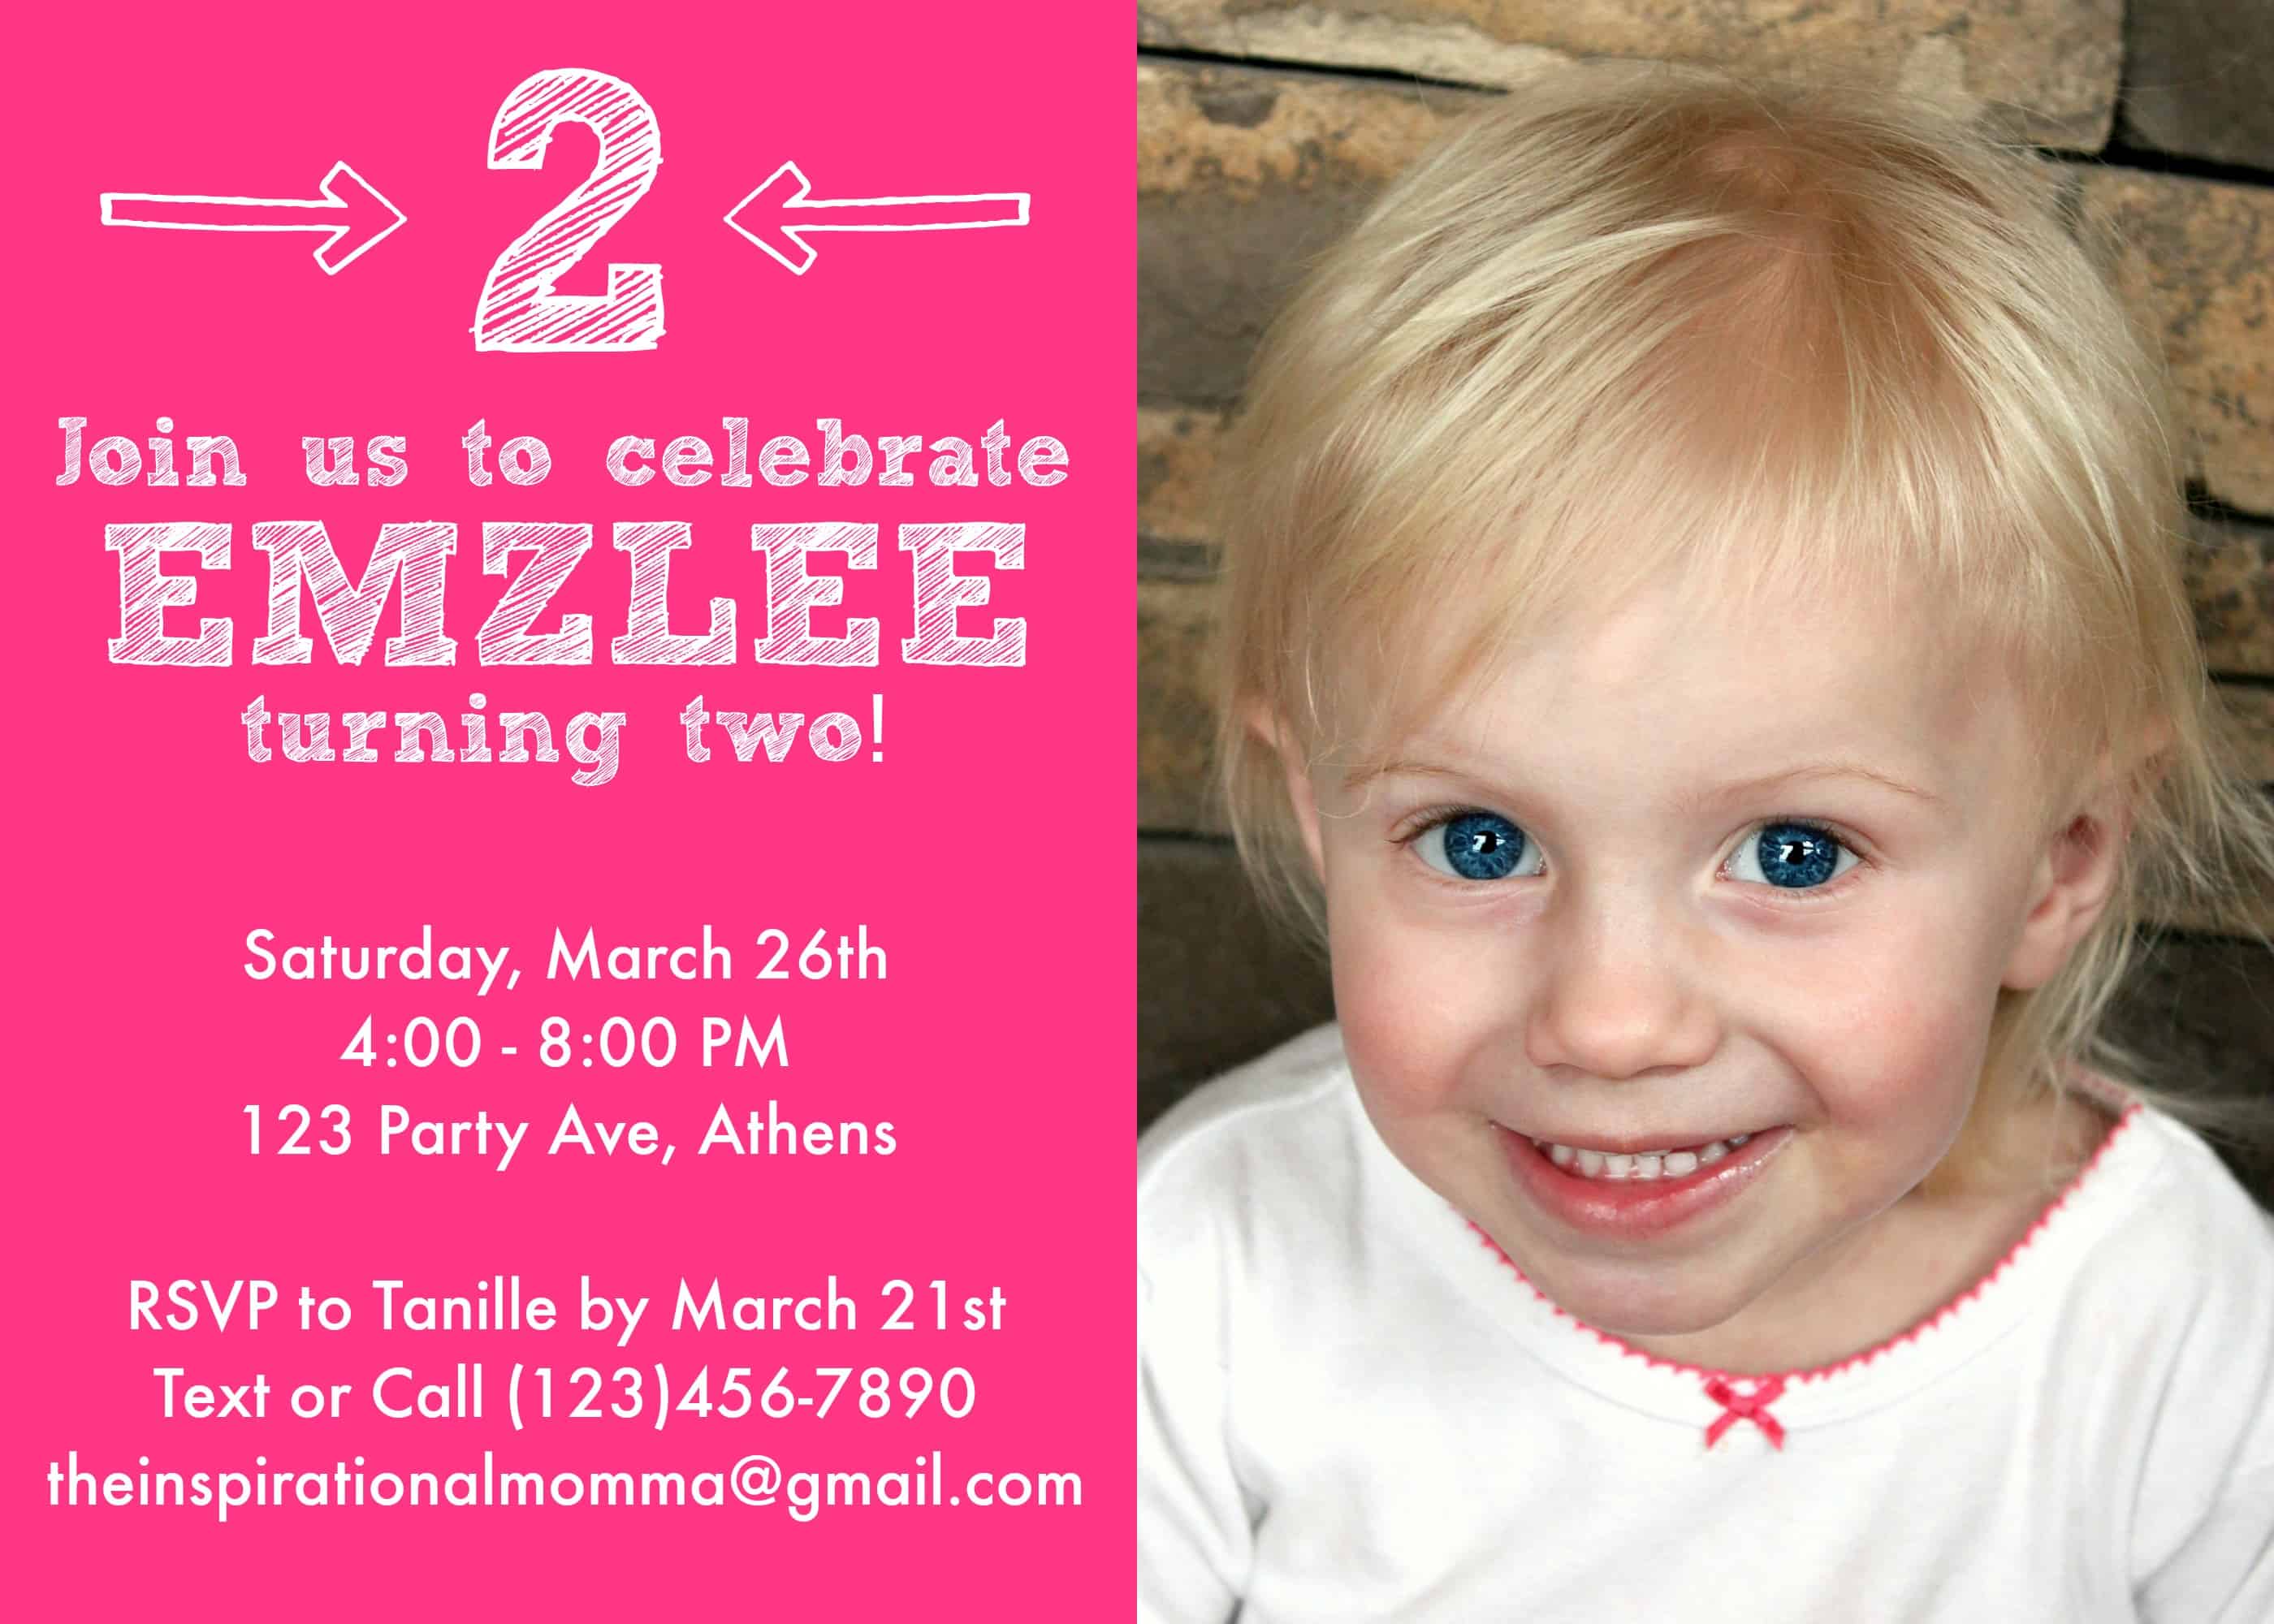 This tutorial will teach you to Create An Invitation With PicMonkey. Birthdays, Graduations, Birth Announcements, etc! Prepare to be amazed!